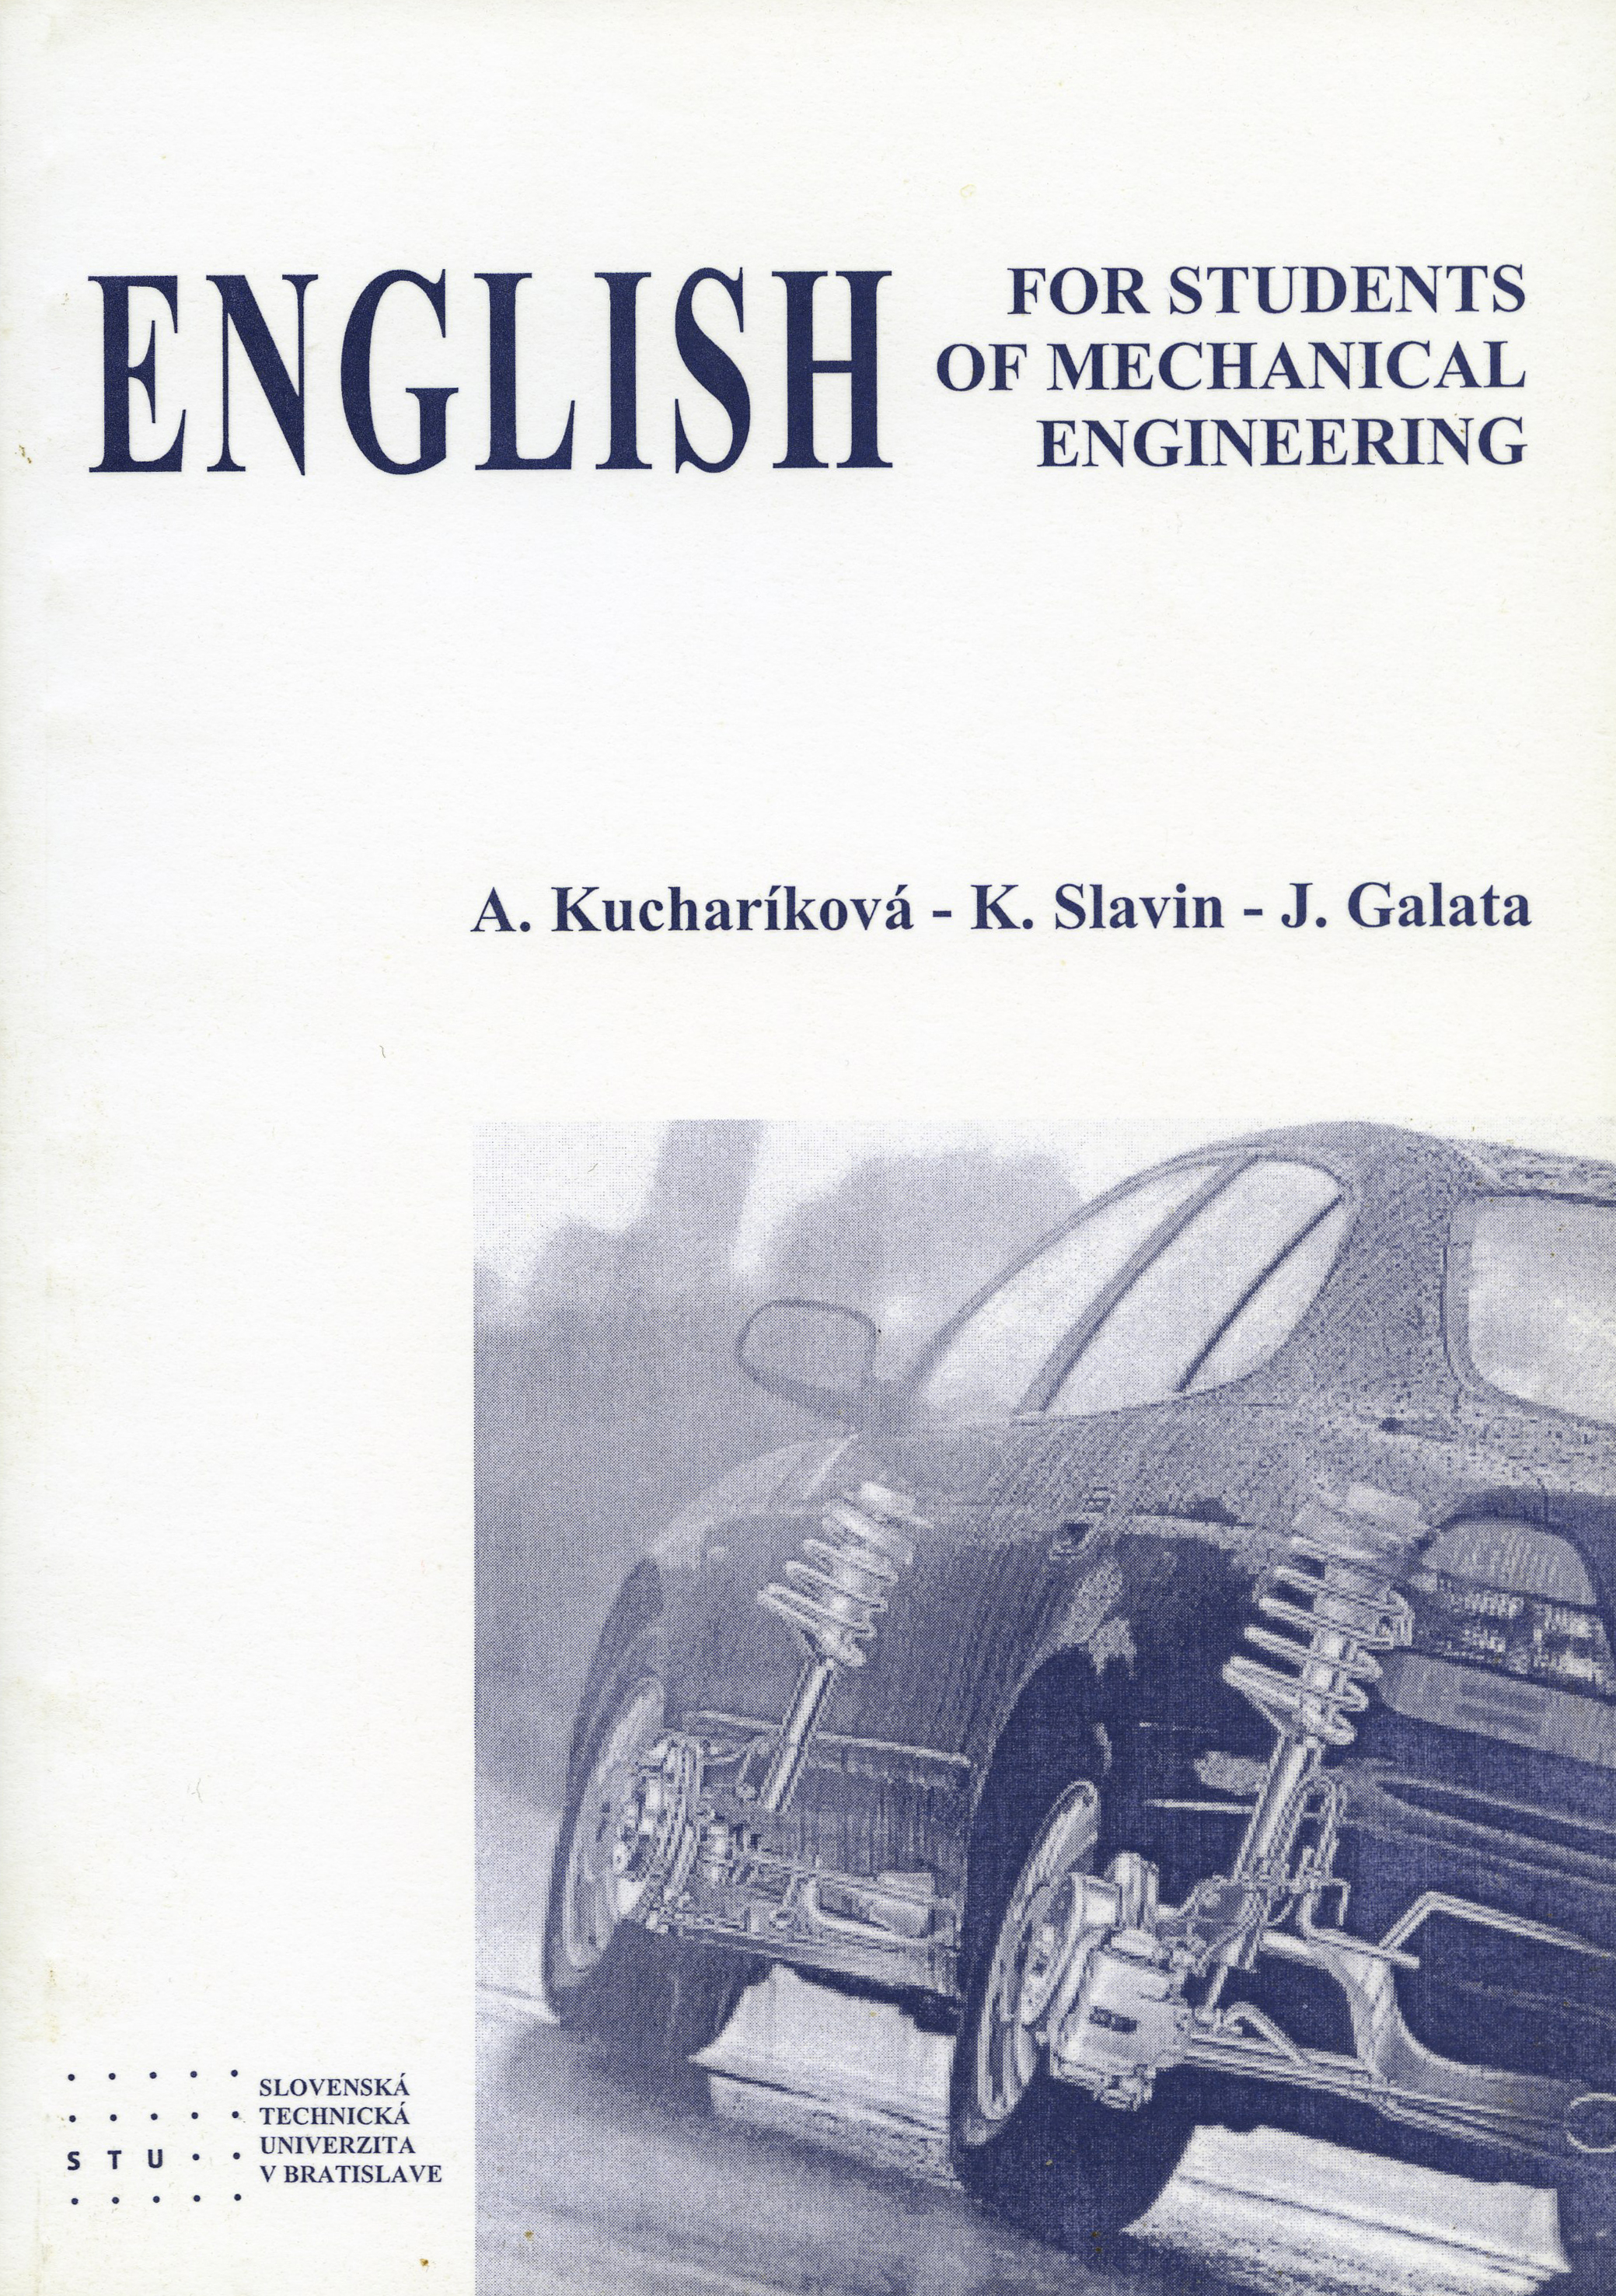 ENGLISH FOR STUDENTS OF MECHANICAL ENGINEERING